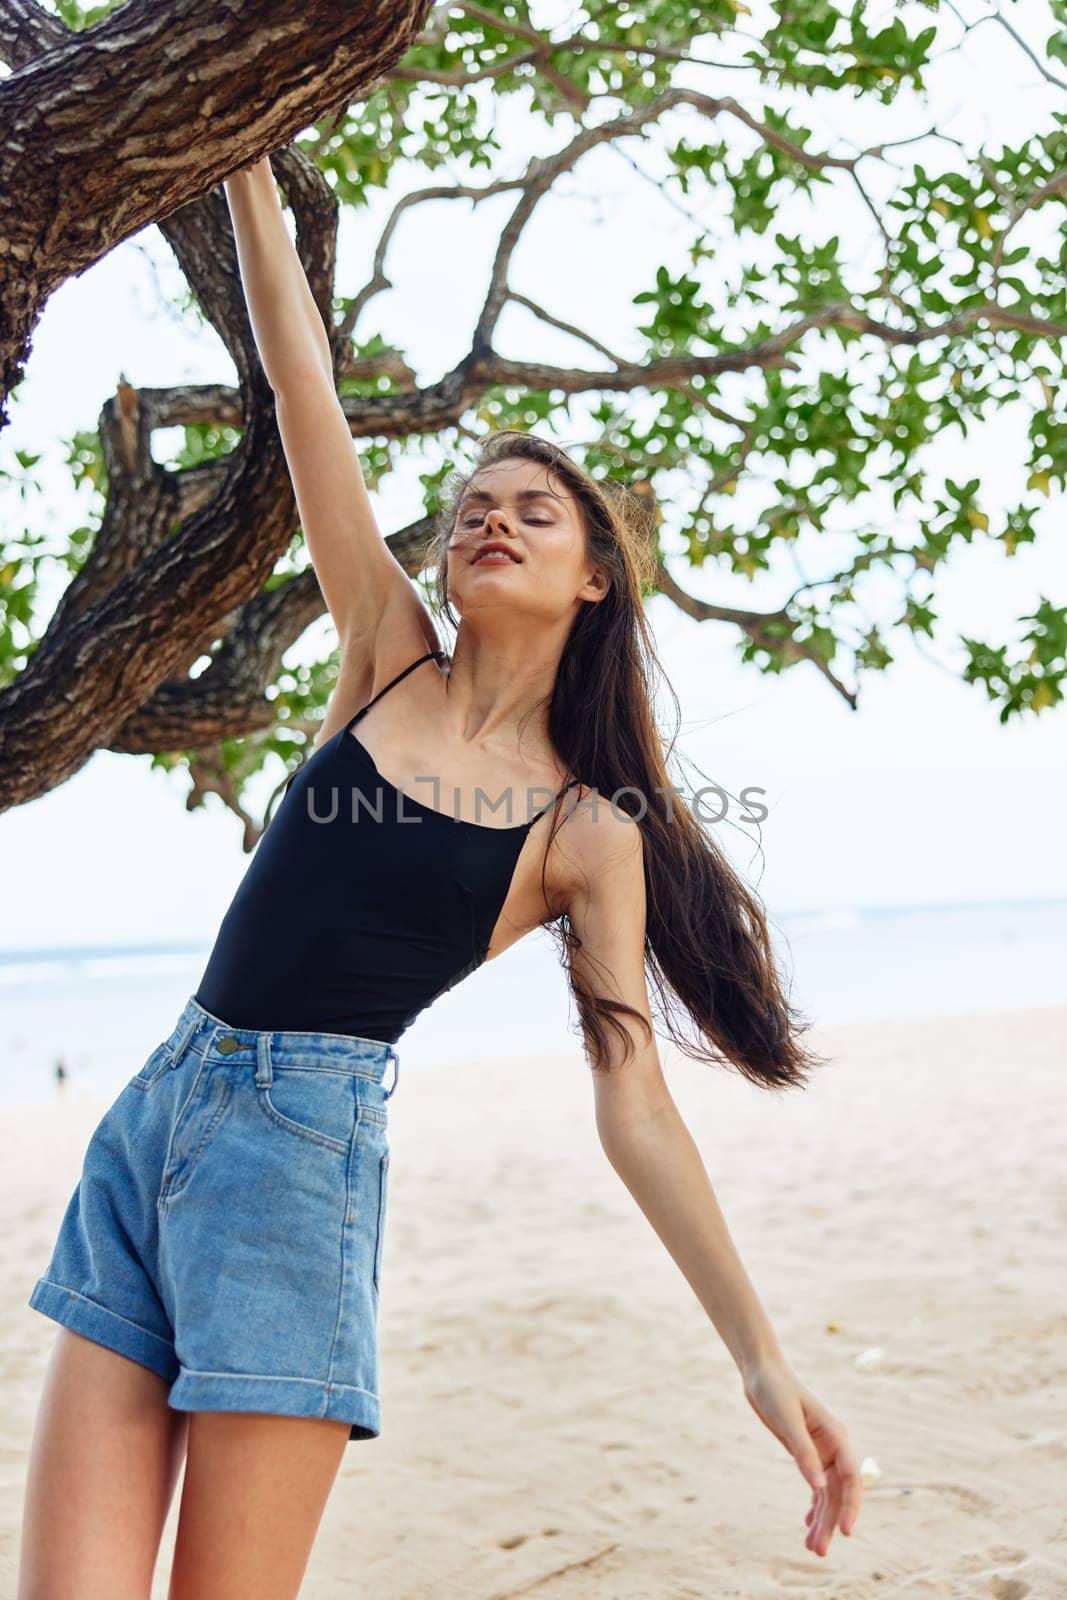 hanging woman lifestyle vacation relax holiday smiling tree sky nature sea by SHOTPRIME